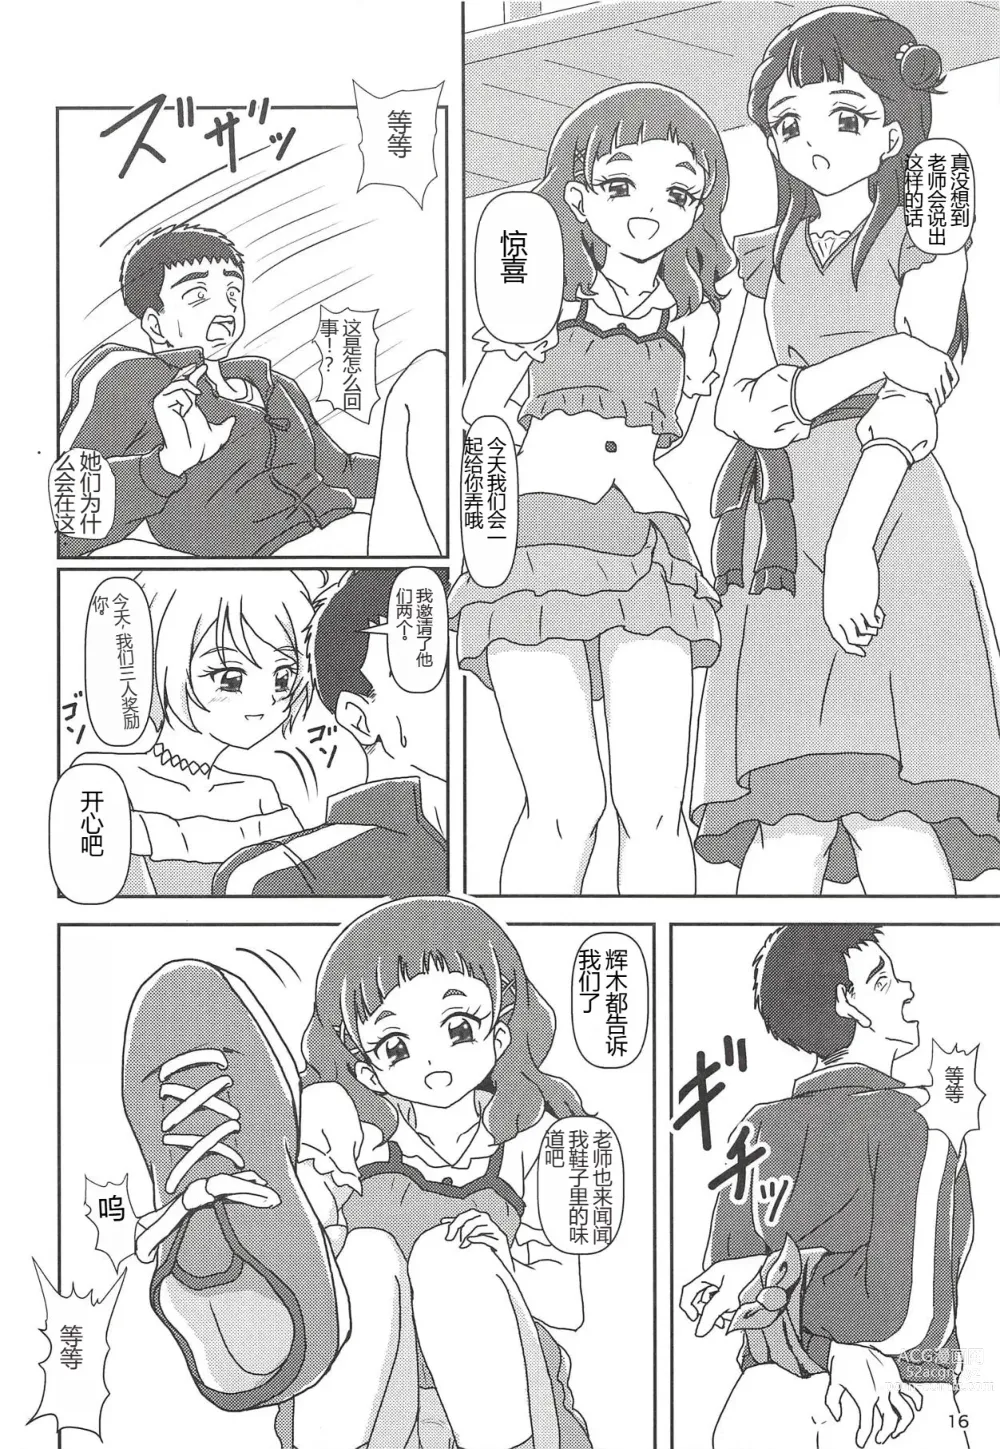 Page 15 of doujinshi Hugtto! Zuricure